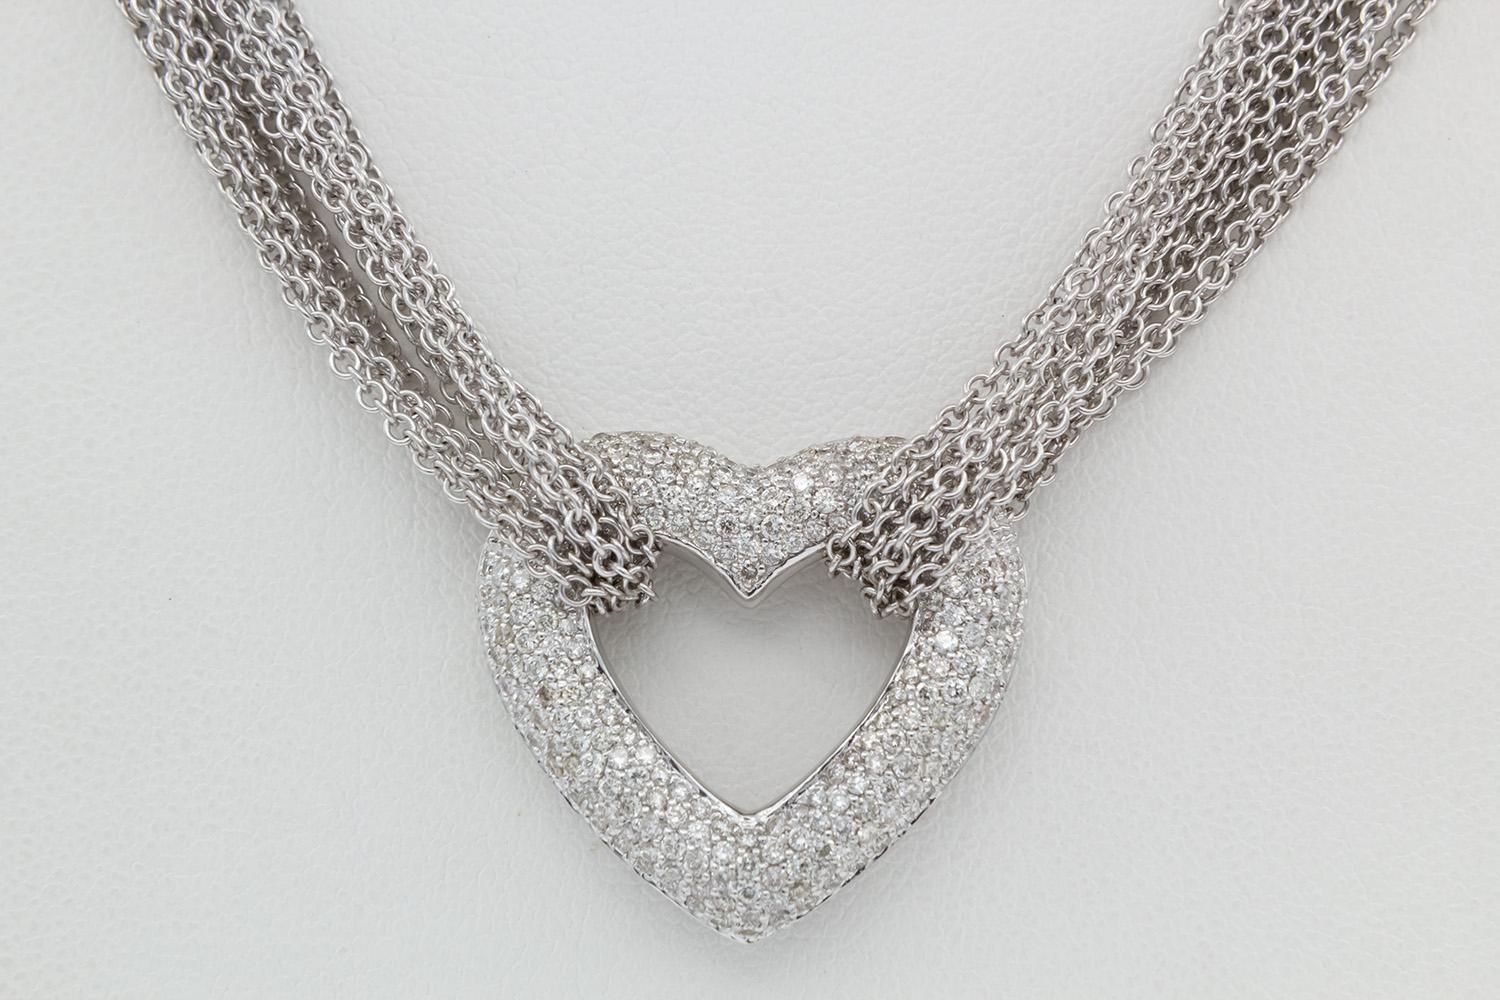 We arepleased to offer this 18k White Gold & Diamond Heart Pendant Necklace. A timeless pendant crafted from dazzling round diamonds, celebrating the exquisite silhouette of your love. This is stunning 18k white gold pendant is set with an estimated